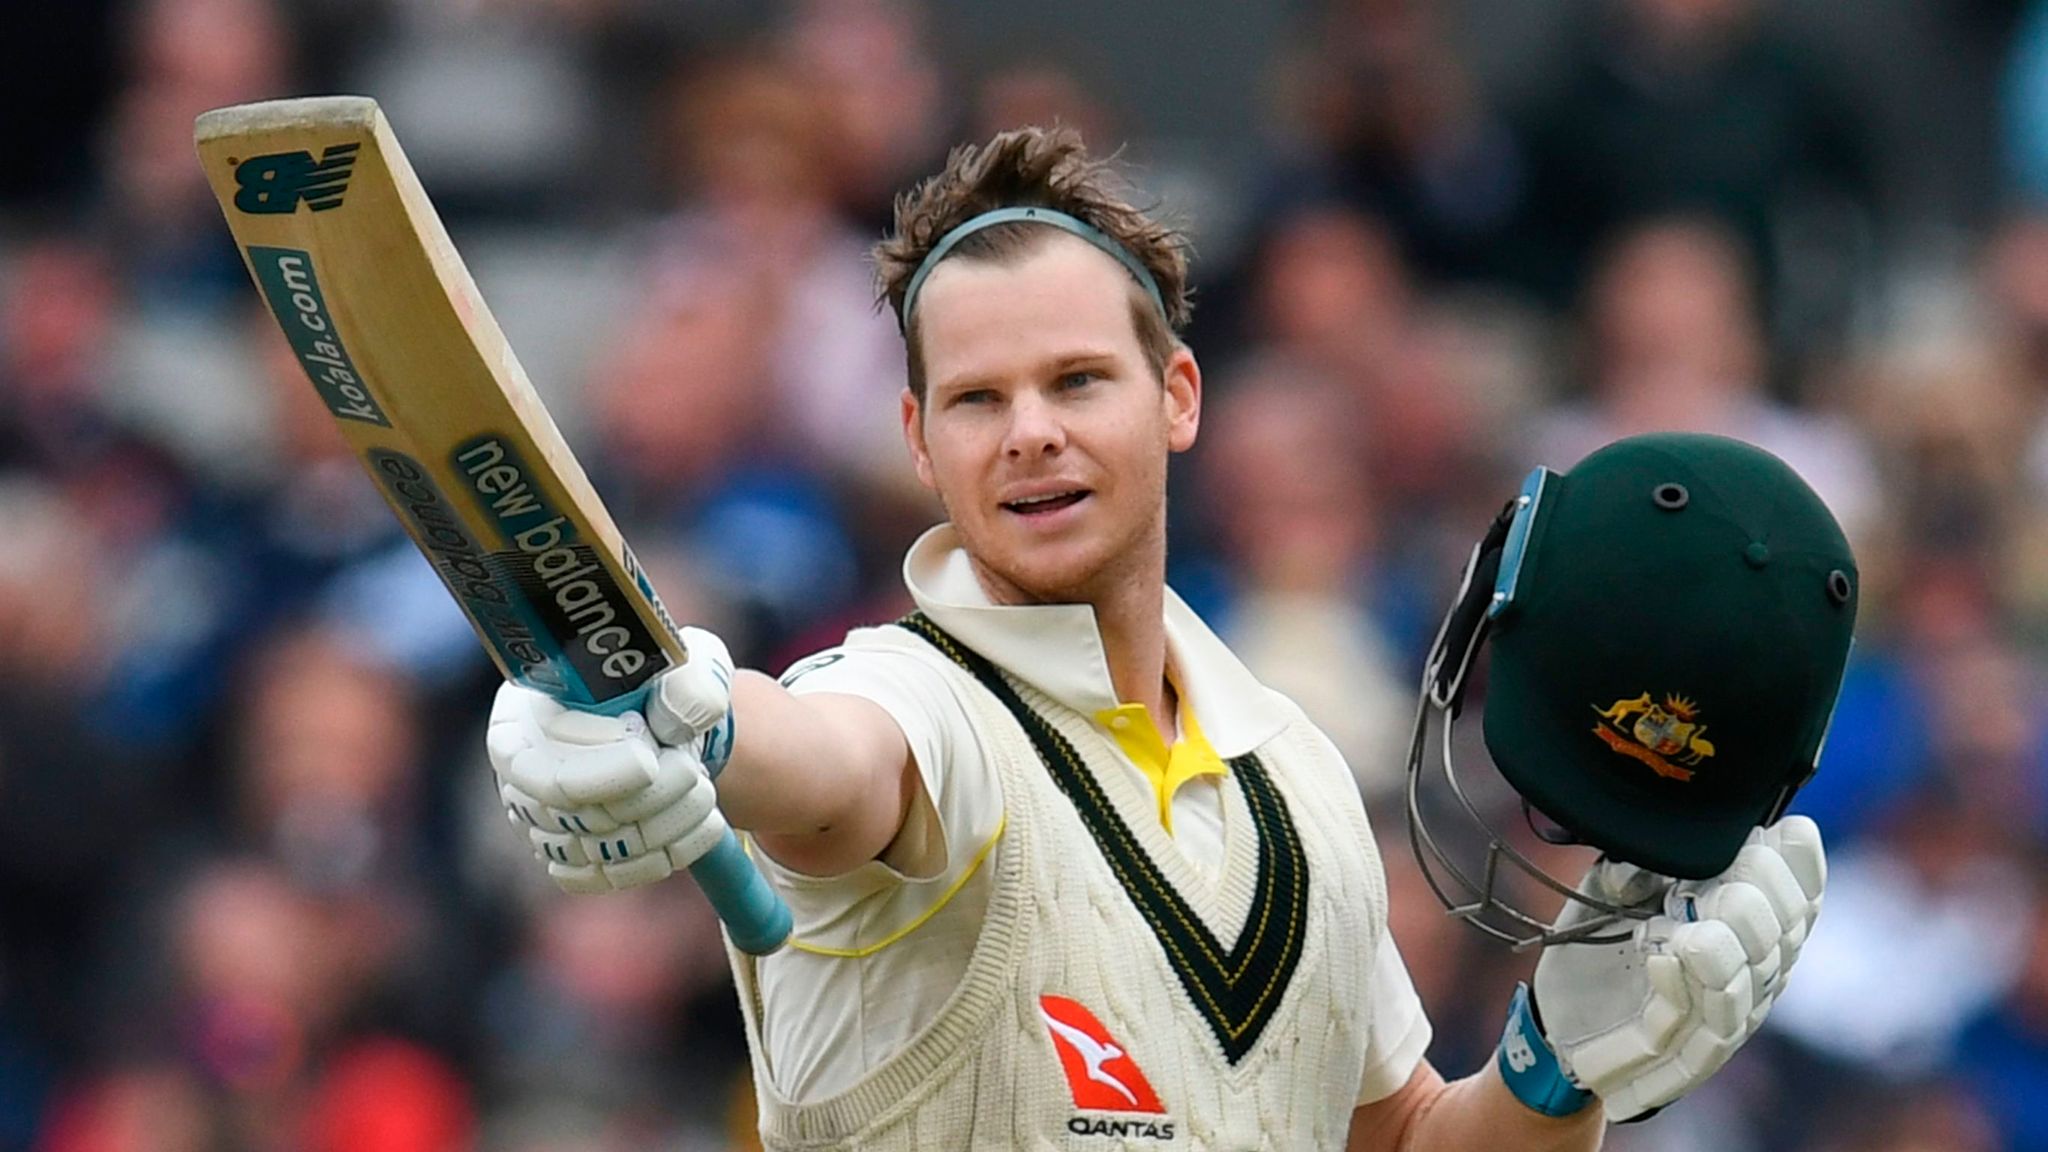 Shane Warne says Steve Smith should focus on batting and not